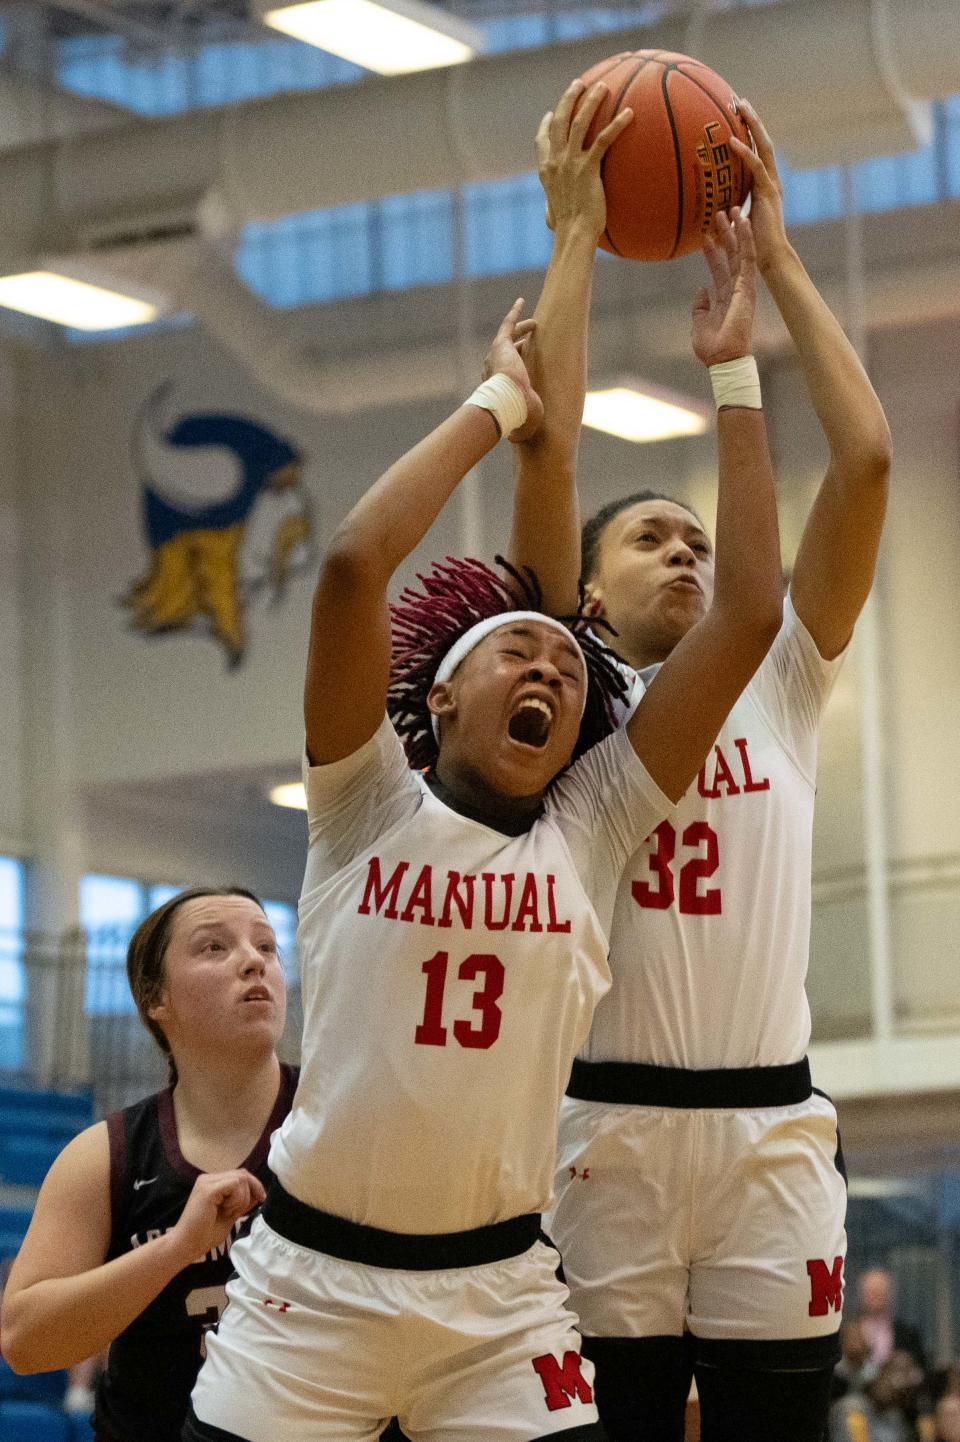 Manual's Ashlinn James (13) and Morrai Blount reach for a rebound against Assumption. James scored a game-high 17 points Wednesday night in a Seventh Region semifinal victory.